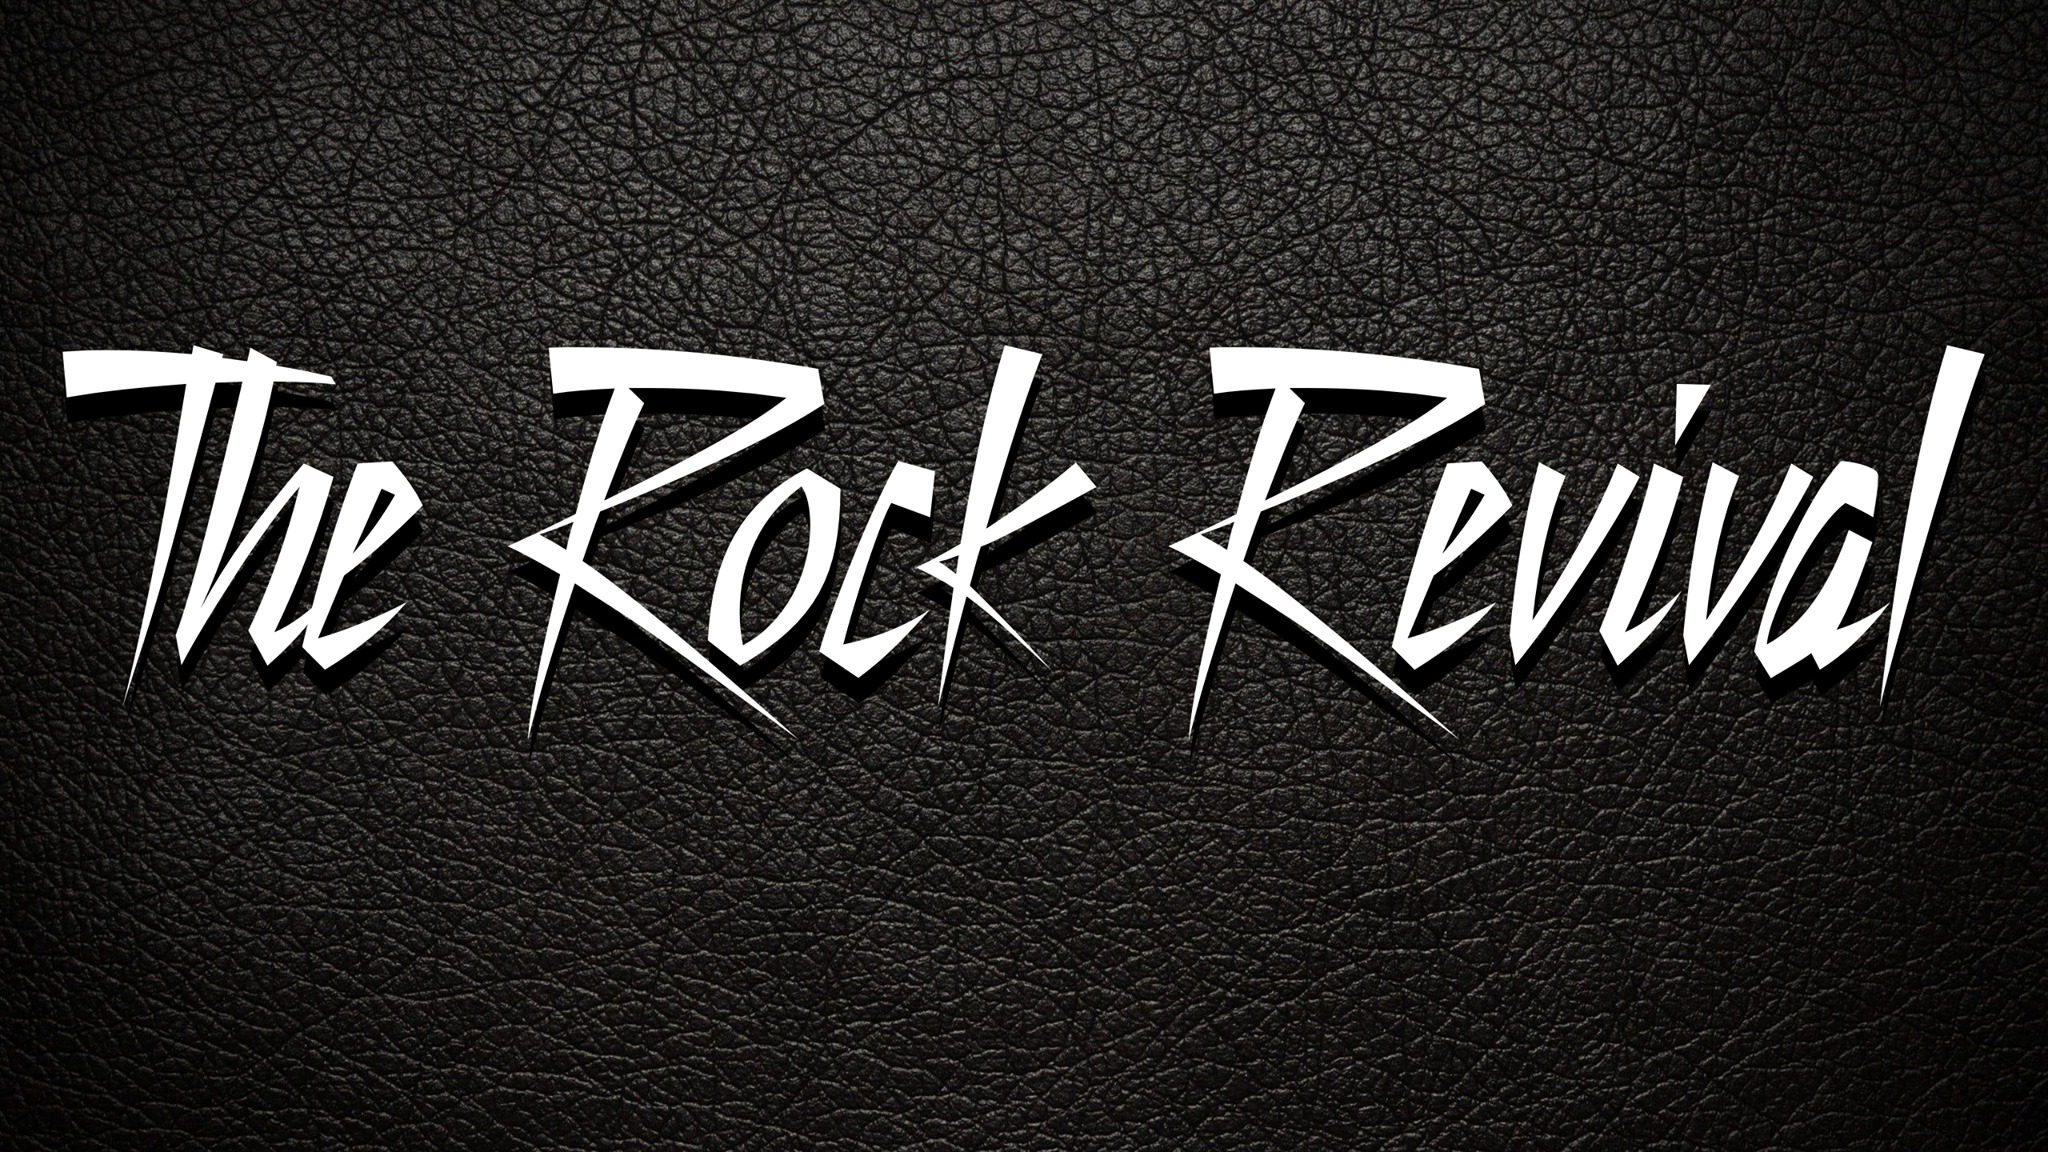 The Rock Revival